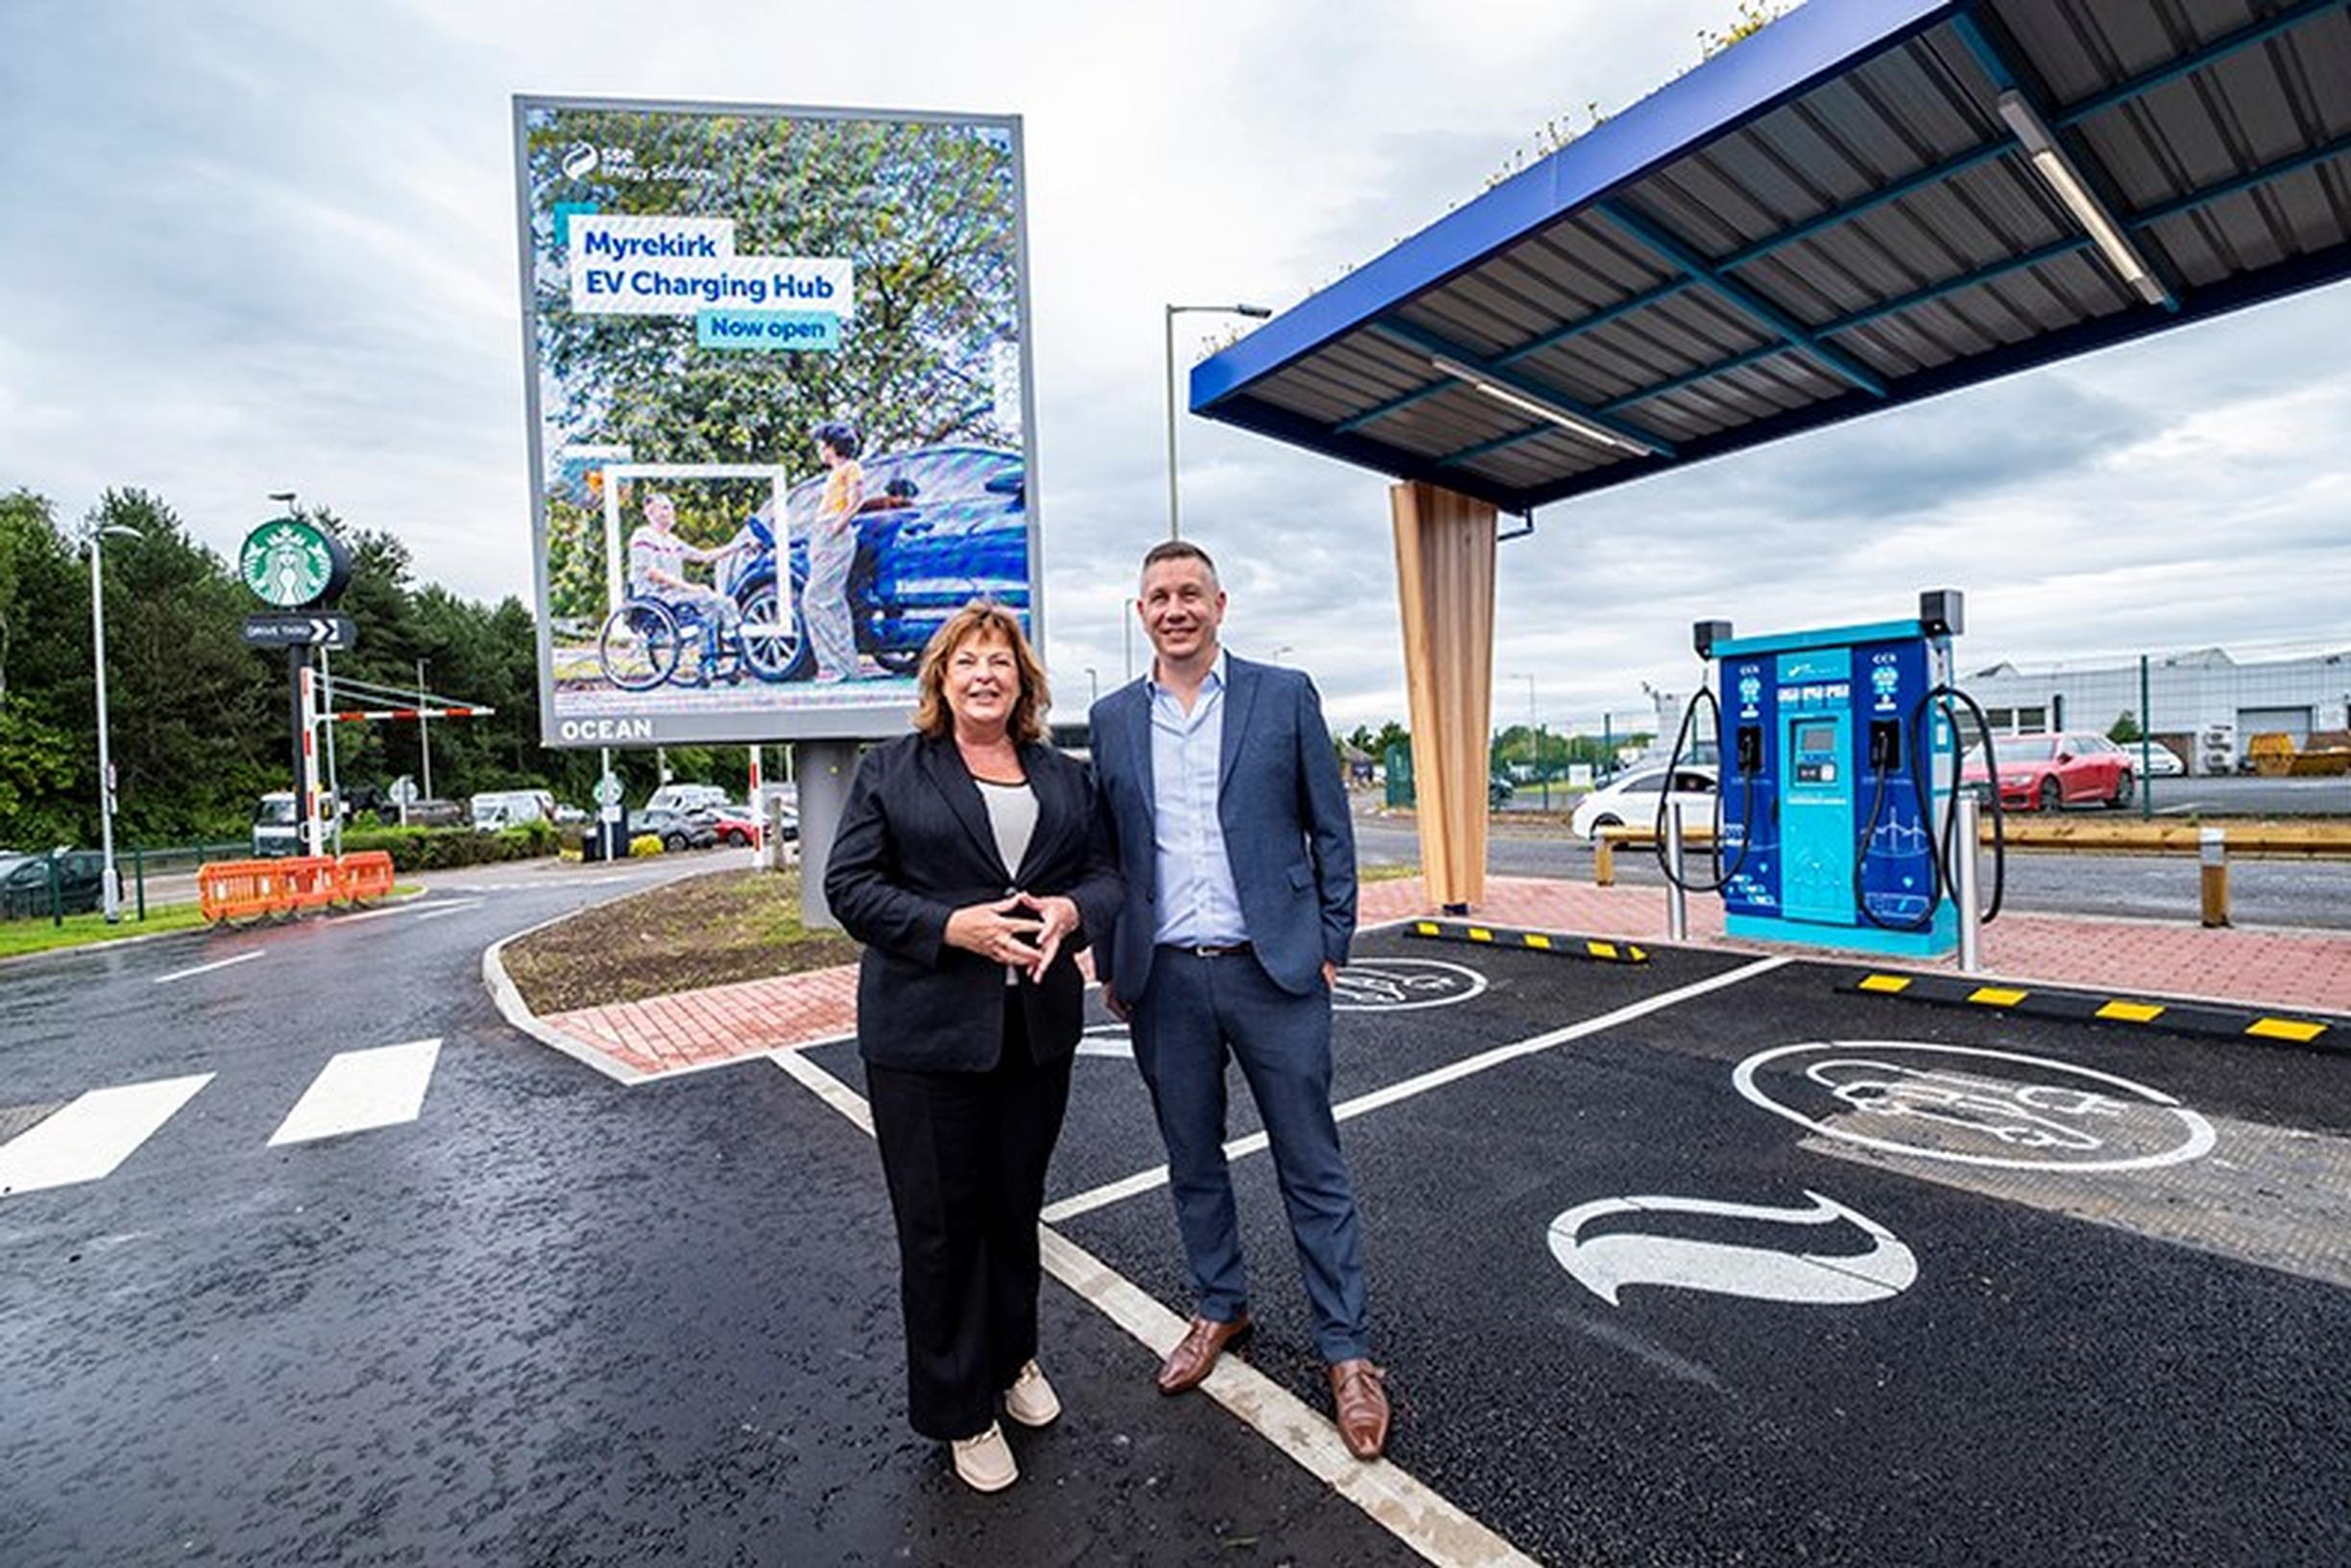 EV charging hub goes live in Dundee